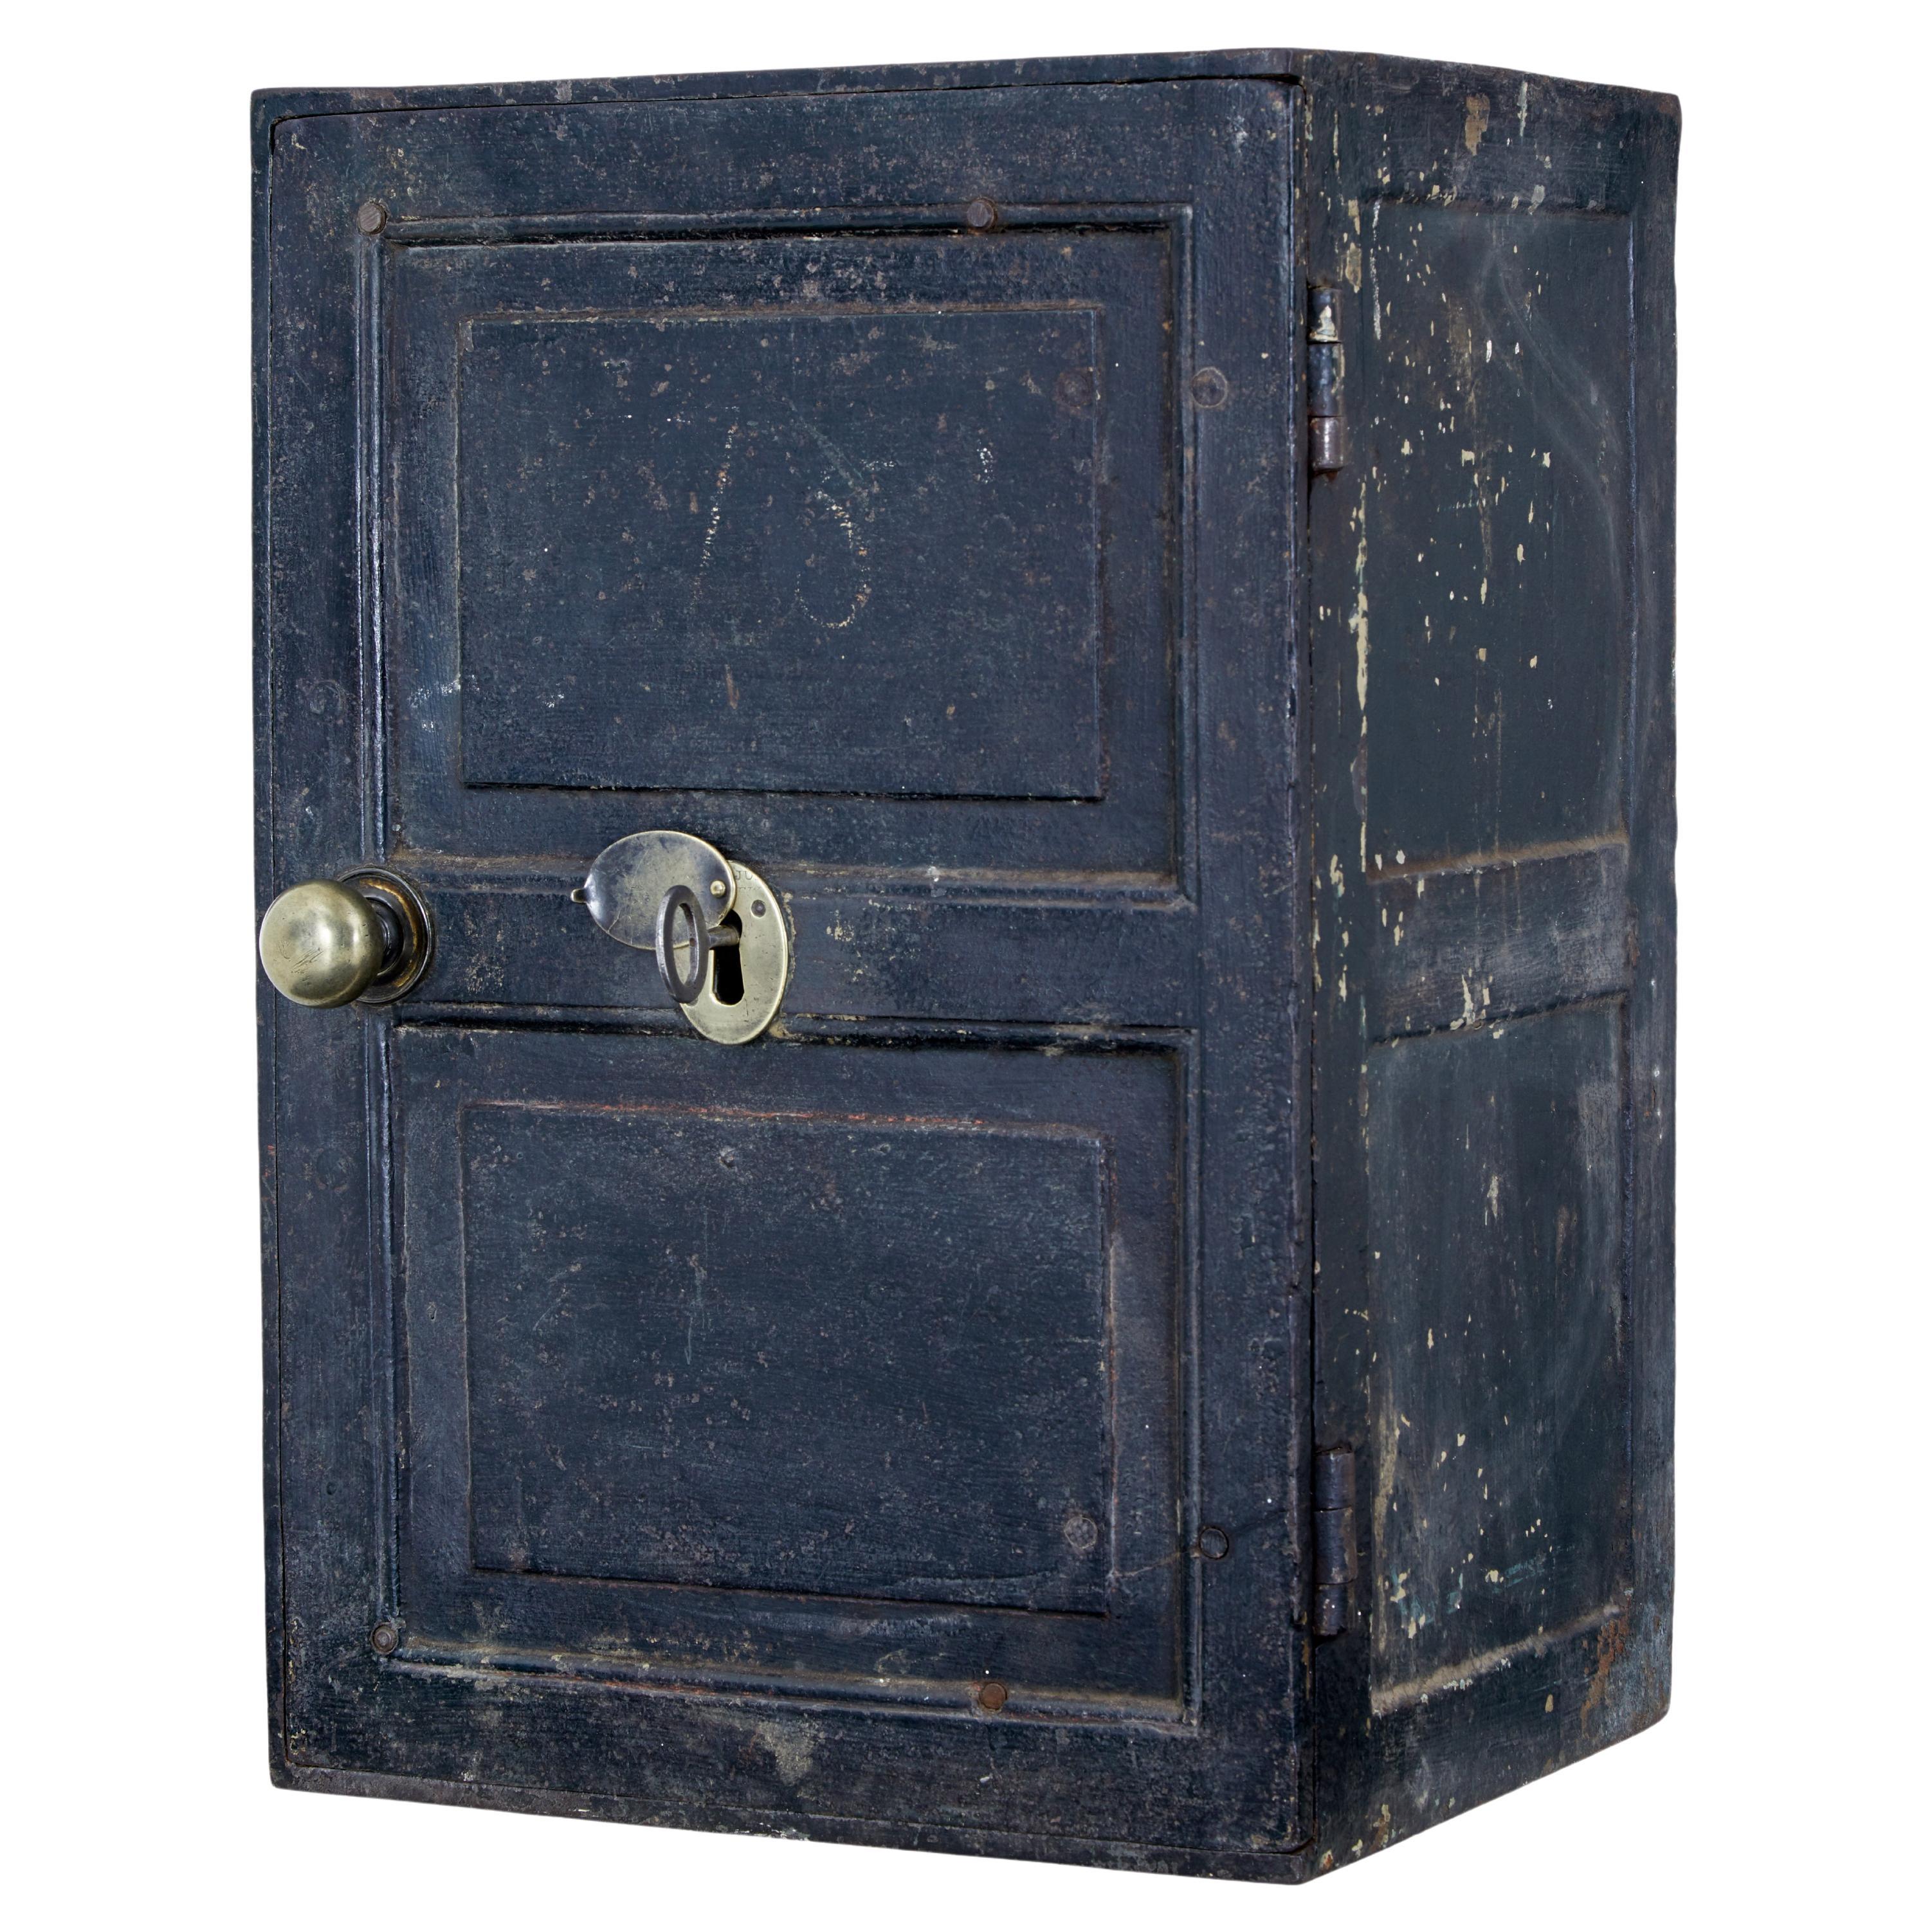 Early 19th Century Cast Iron Safe in Original Paint